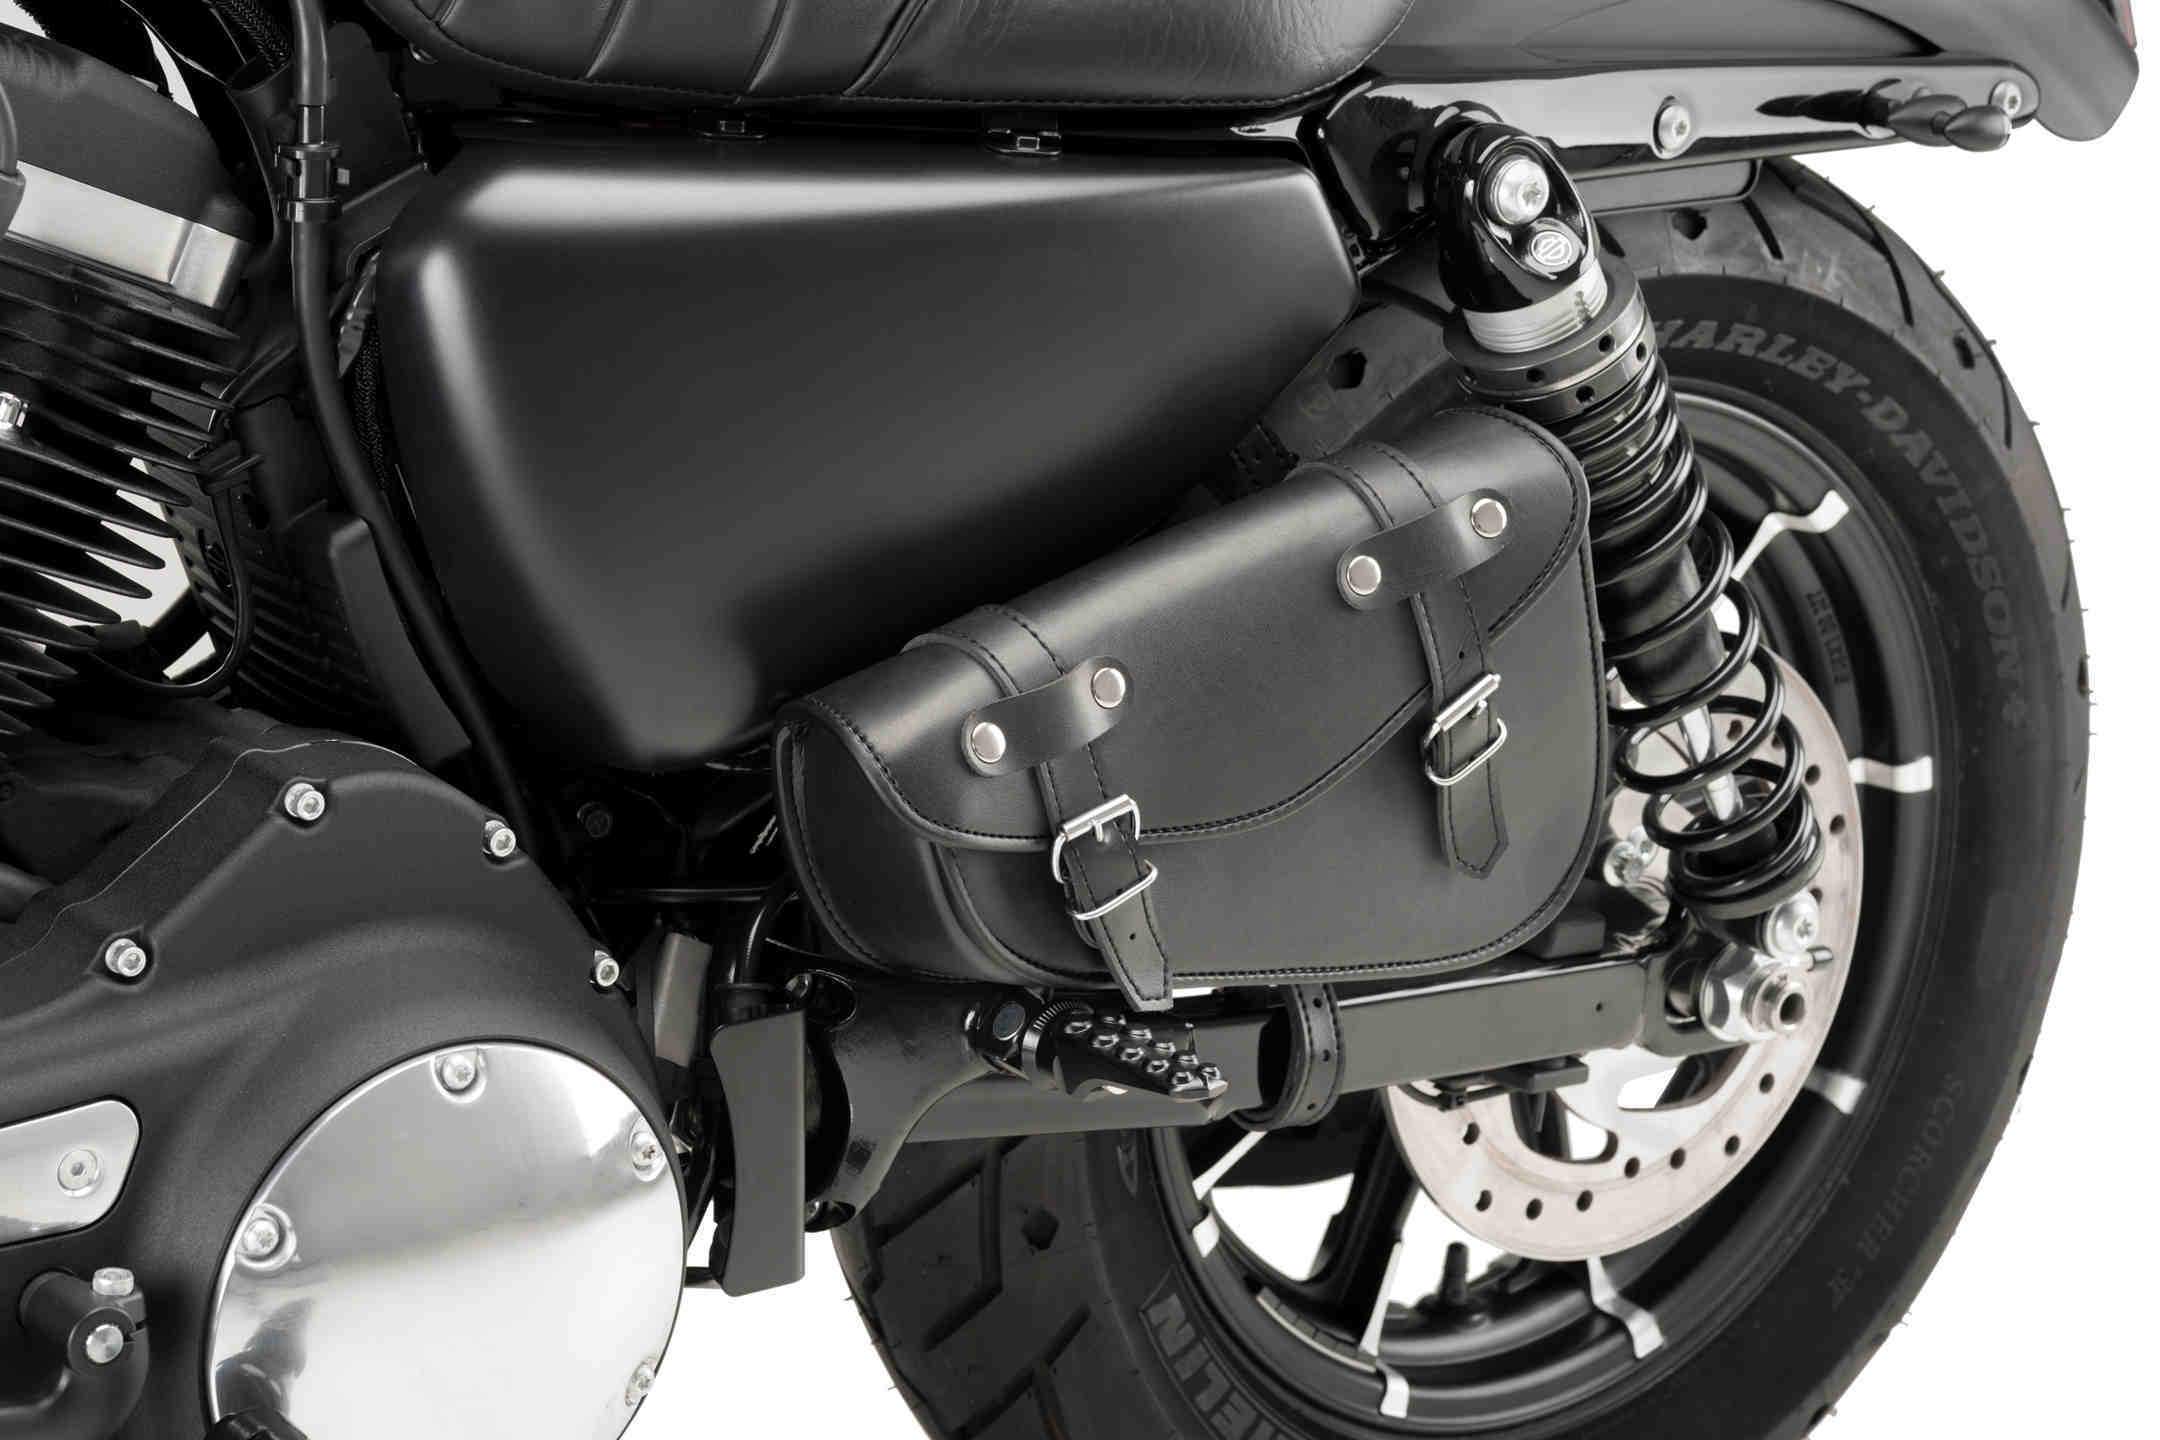 Customacces Detroit Left Saddlebag No Support Included | Black | Honda VTX 1800 R 2001>2006-XAP0003N-Storage-Pyramid Motorcycle Accessories